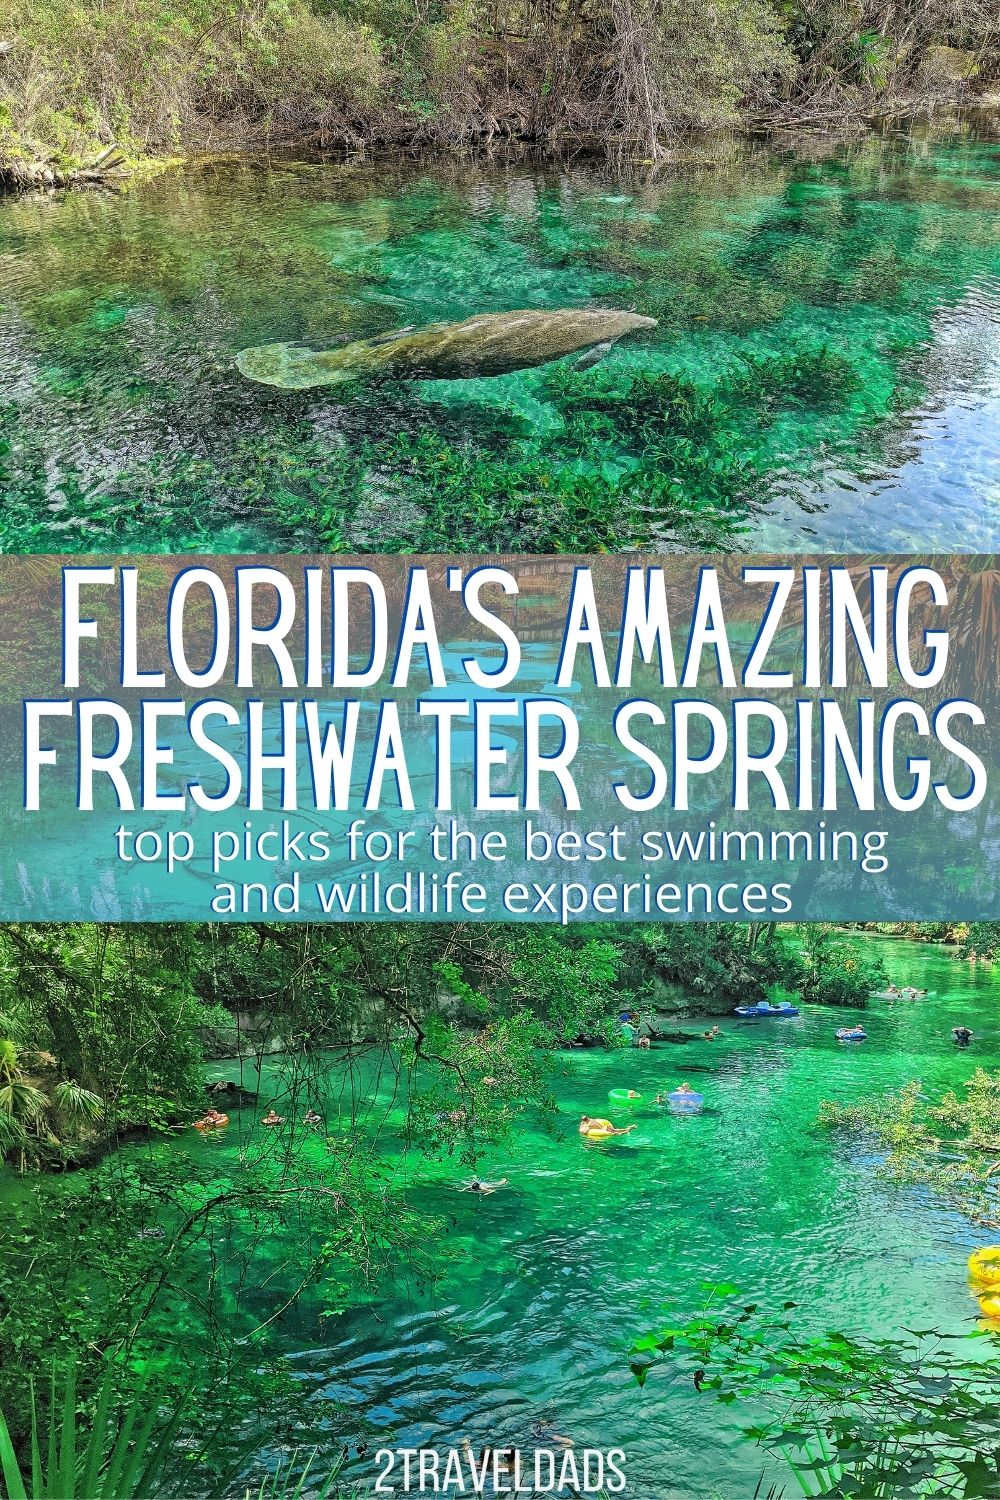 Florida's freshwater springs are relatively unknown and easy to visit. Our top picks for beautiful swimming spots and the best wildlife viewing in Florida.